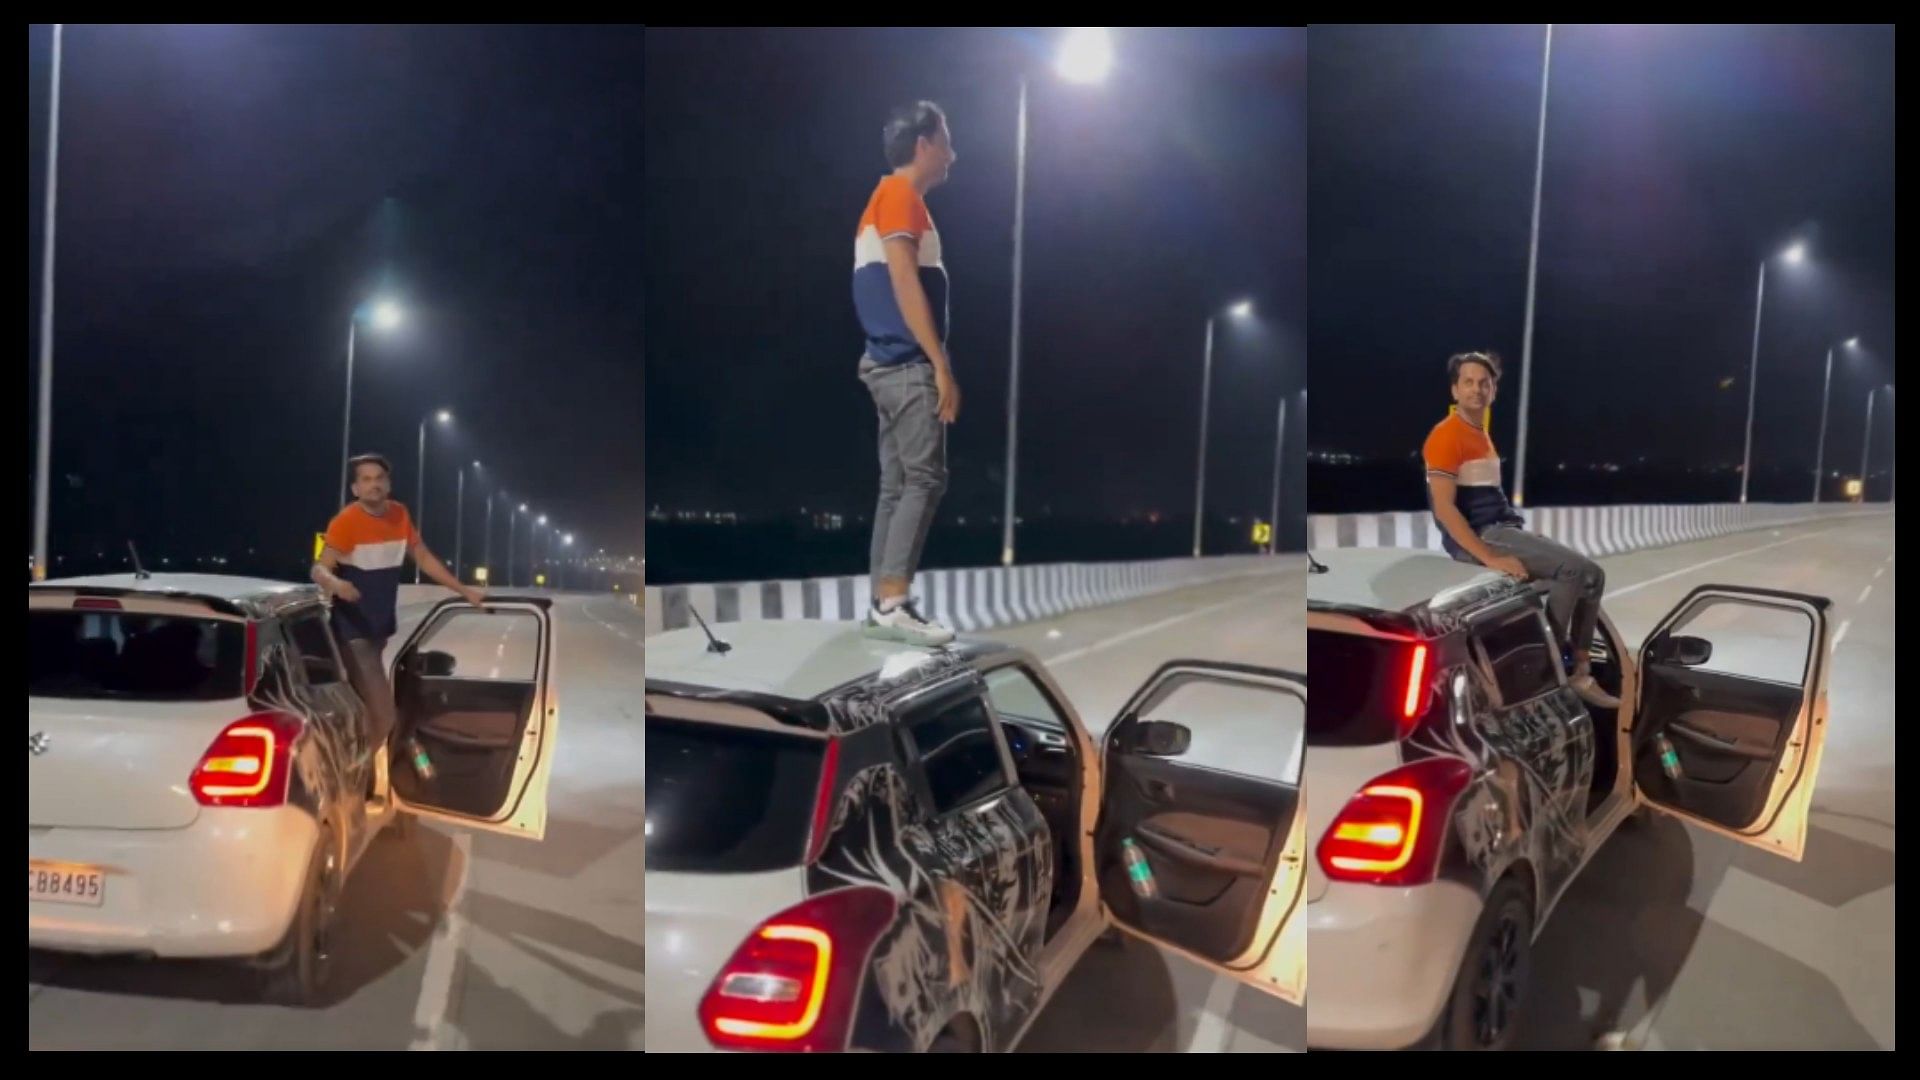 Man opens gate of a moving car stands on its roof dangerous stunt video viral on social media